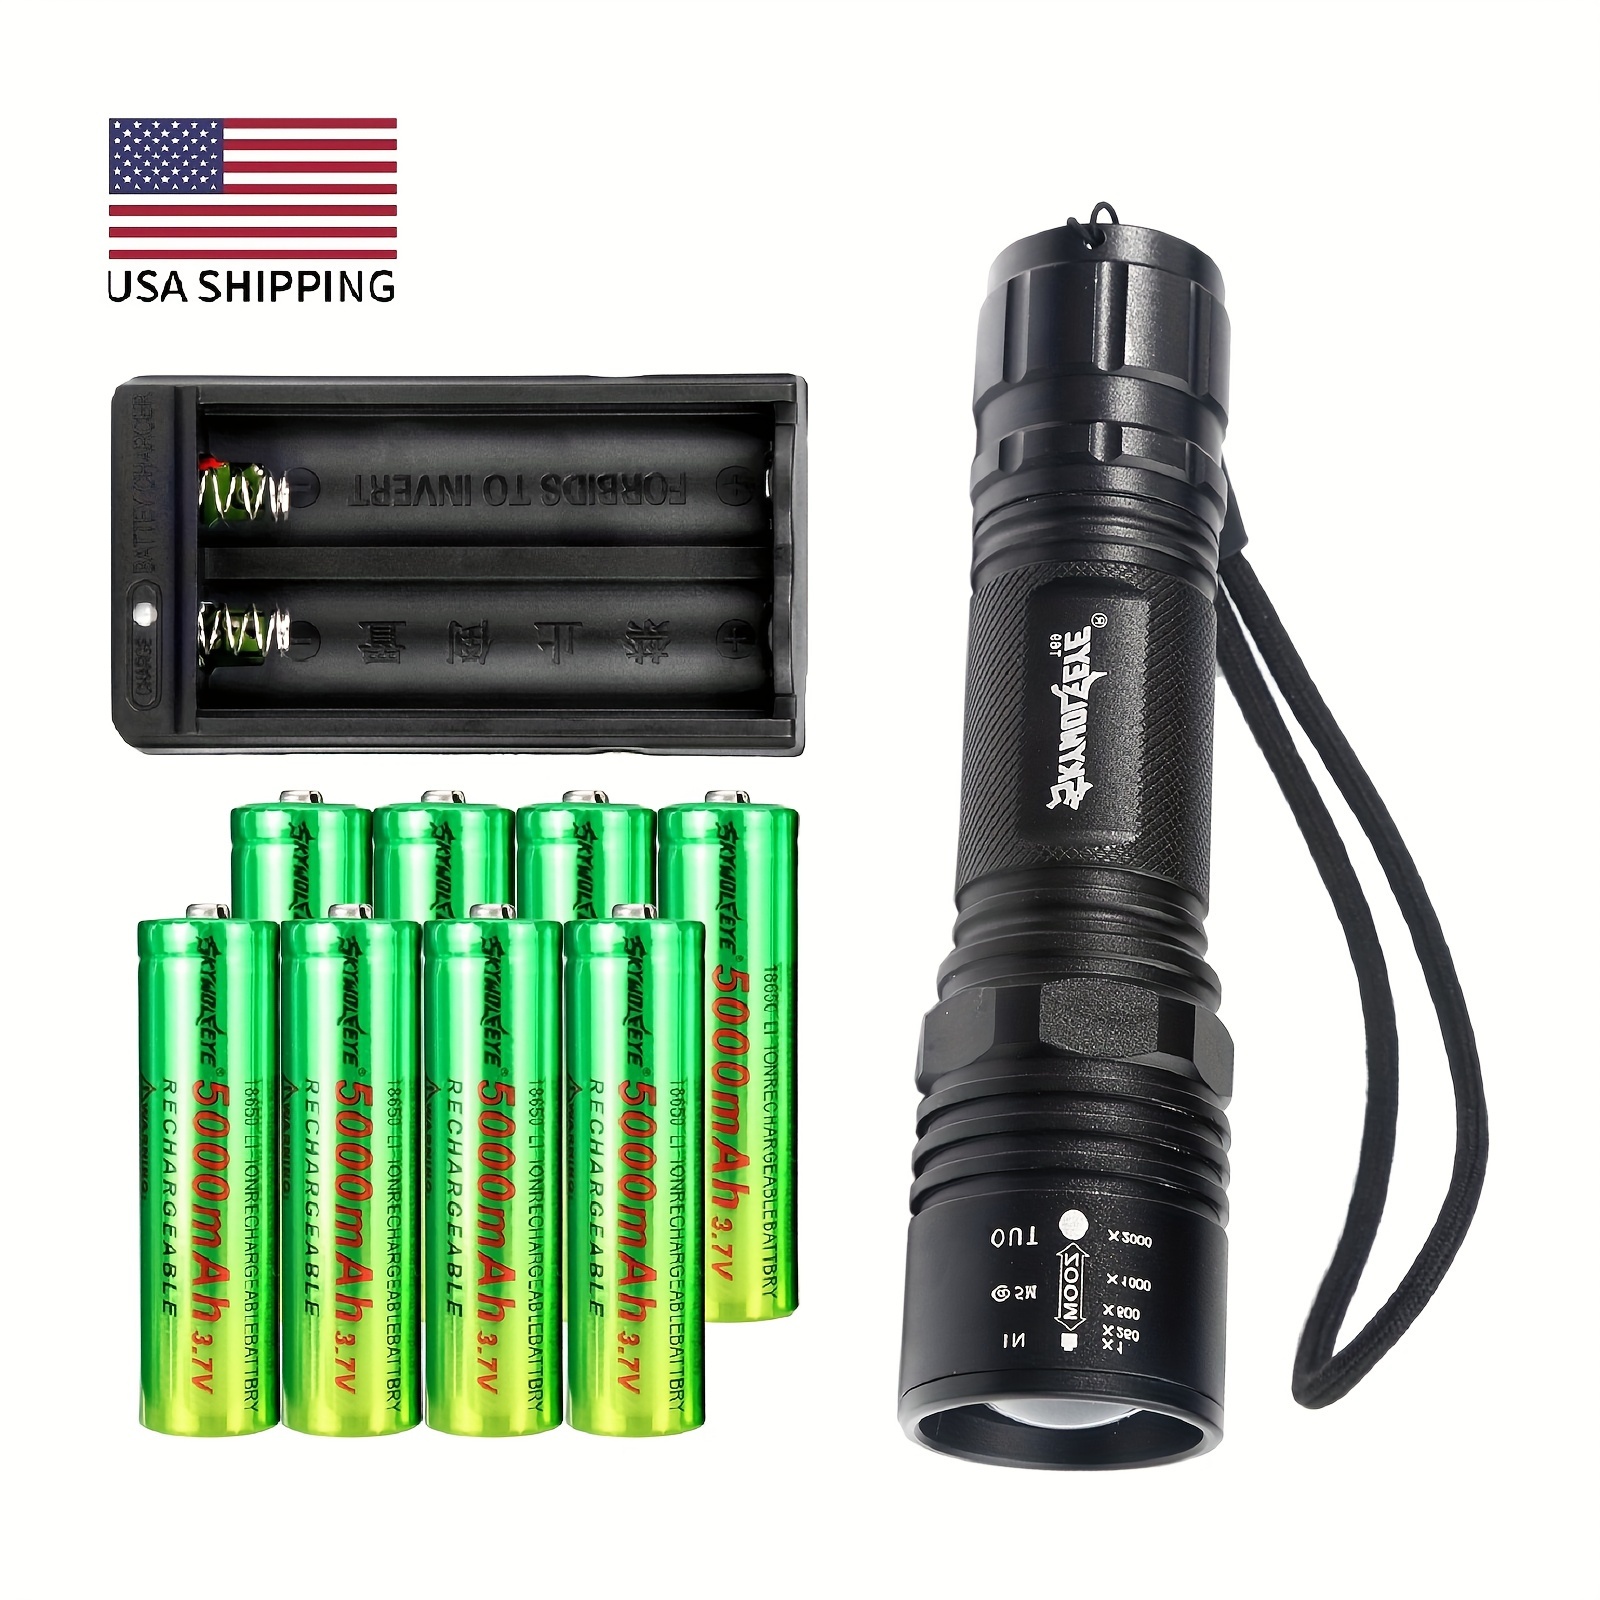 

1 Pack High Lumens 5 Modes Compact Flashlight Set With 8*18650 Batteries And 1*battery Charger, Portable Zoomable Handheld Torch Lights For Camping/outdoor/hiking/emergency